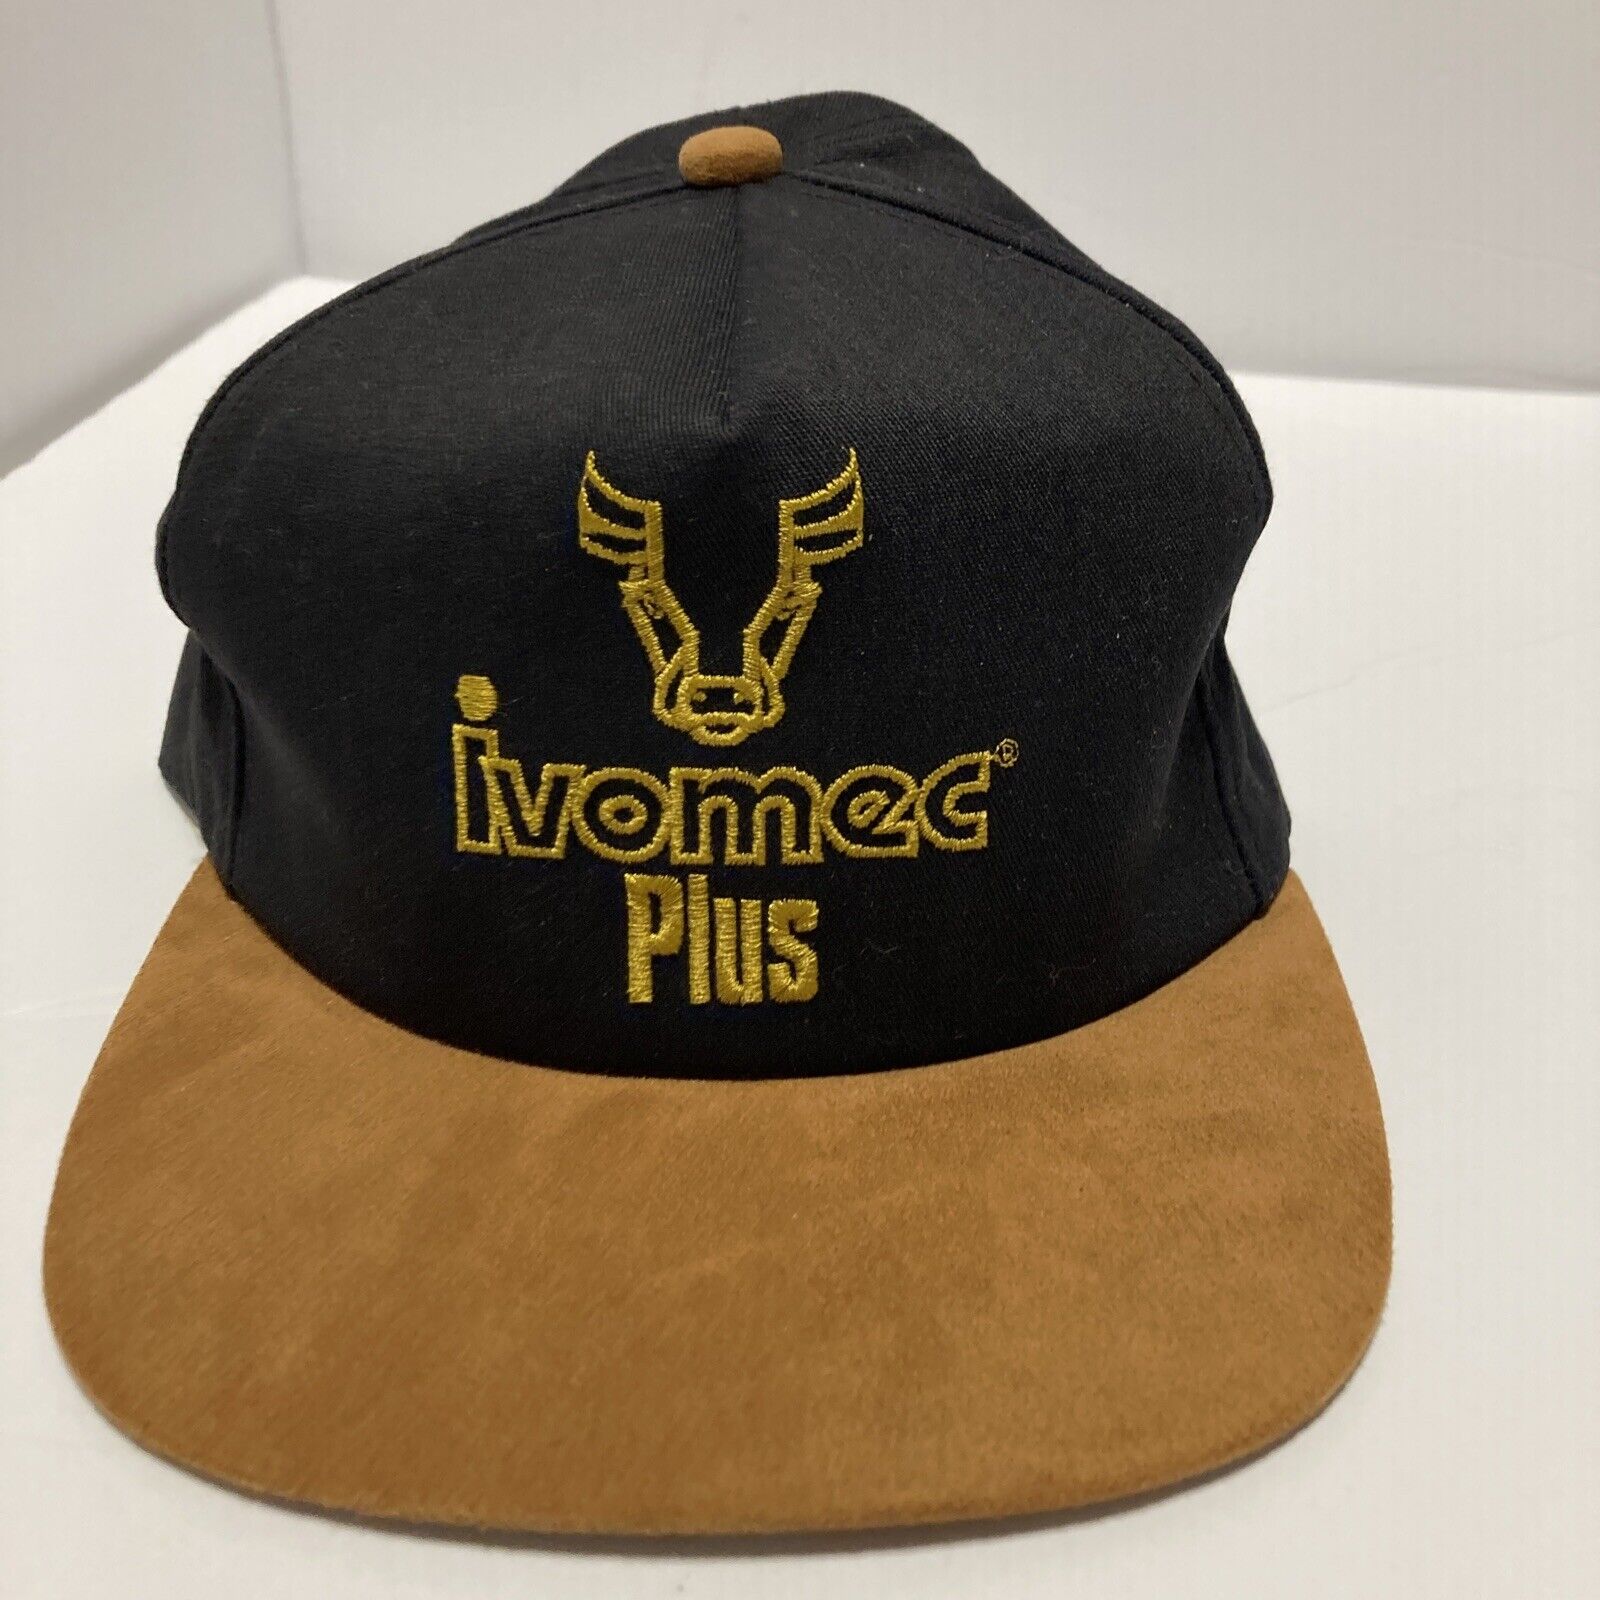 Ivomec Plus SnapBack Truckers Hat Black And Gold/Brown Made In USA